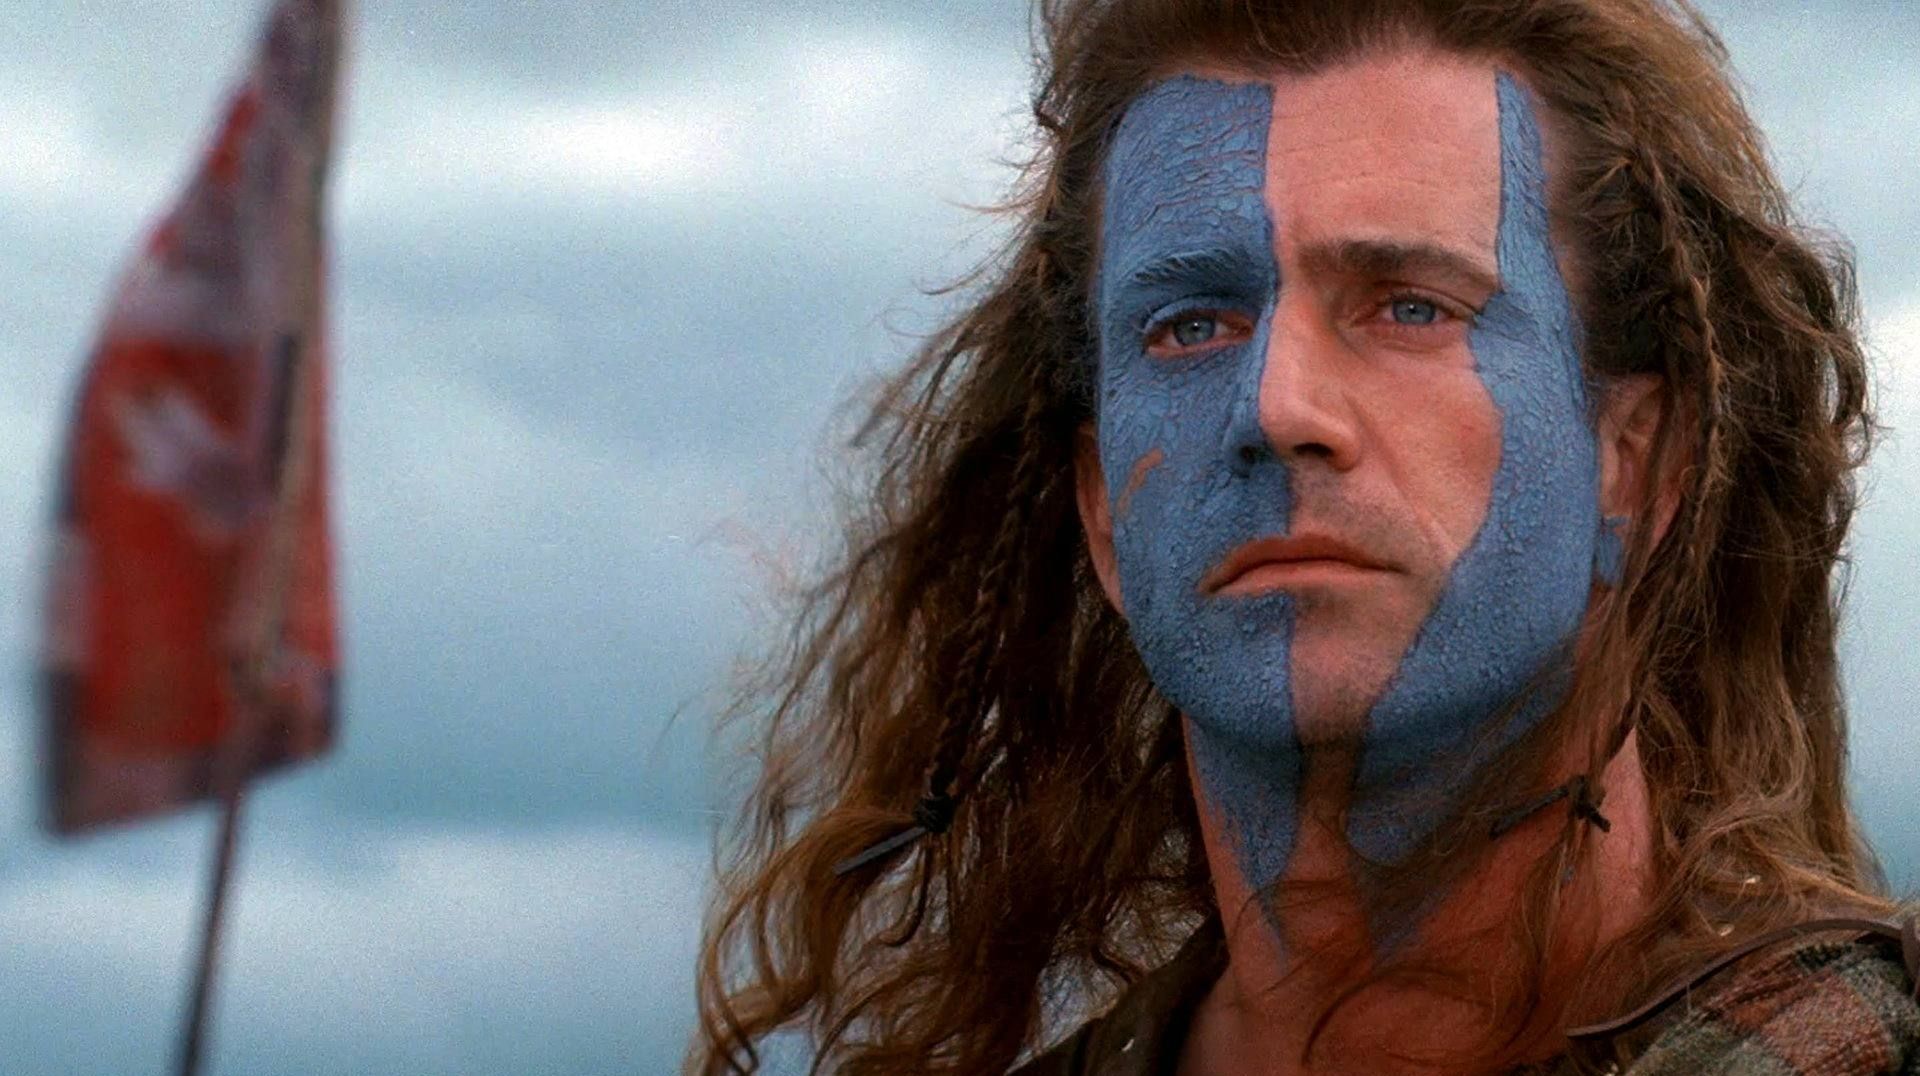 Several scenes in Braveheart had to be re-shot as some extra